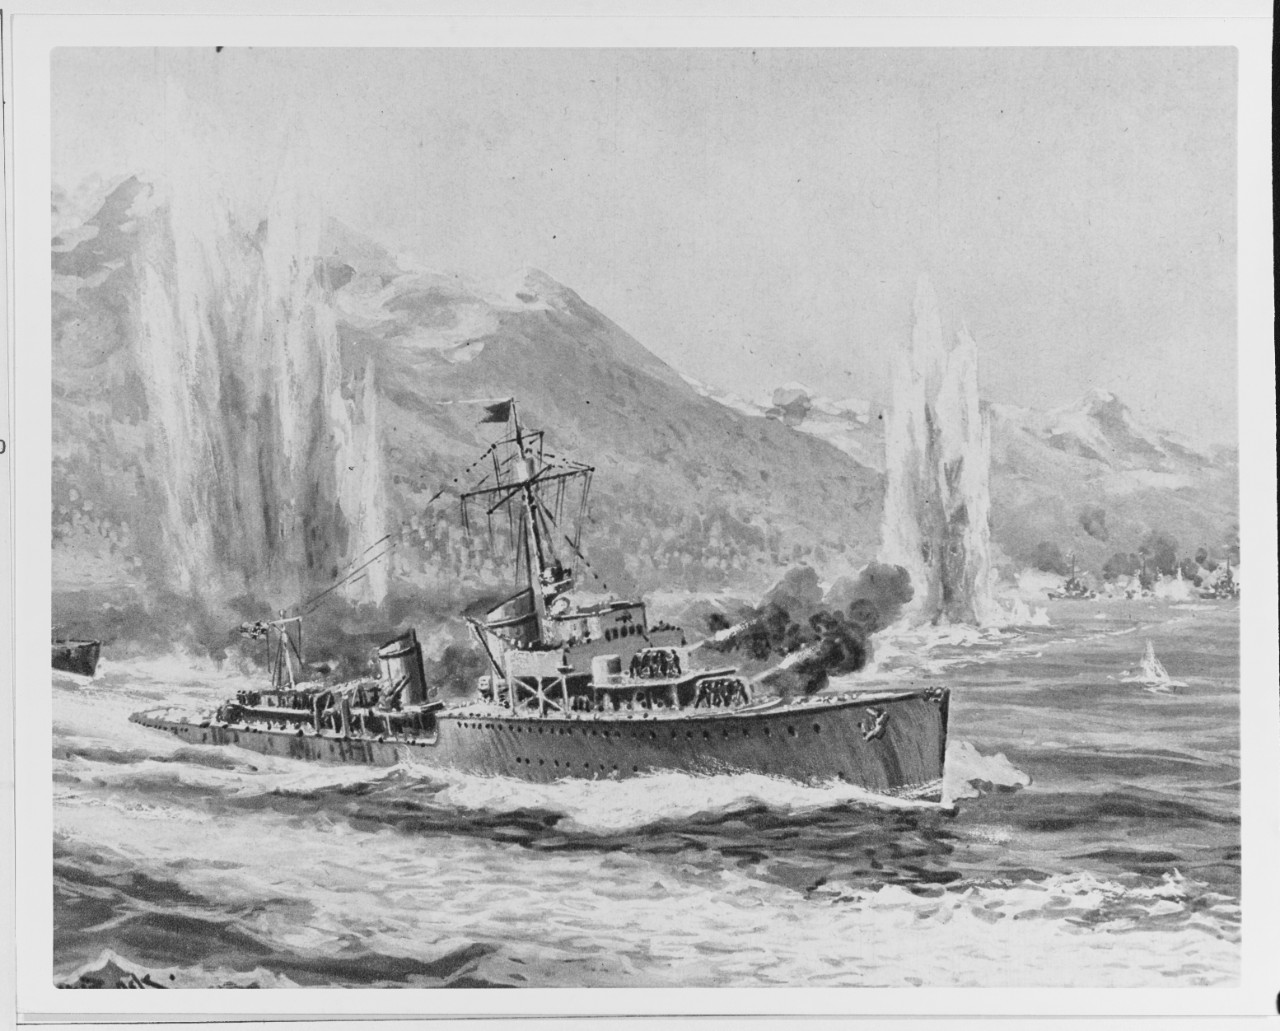 "The Heroic Struggle of our Destroyers at Narvik"